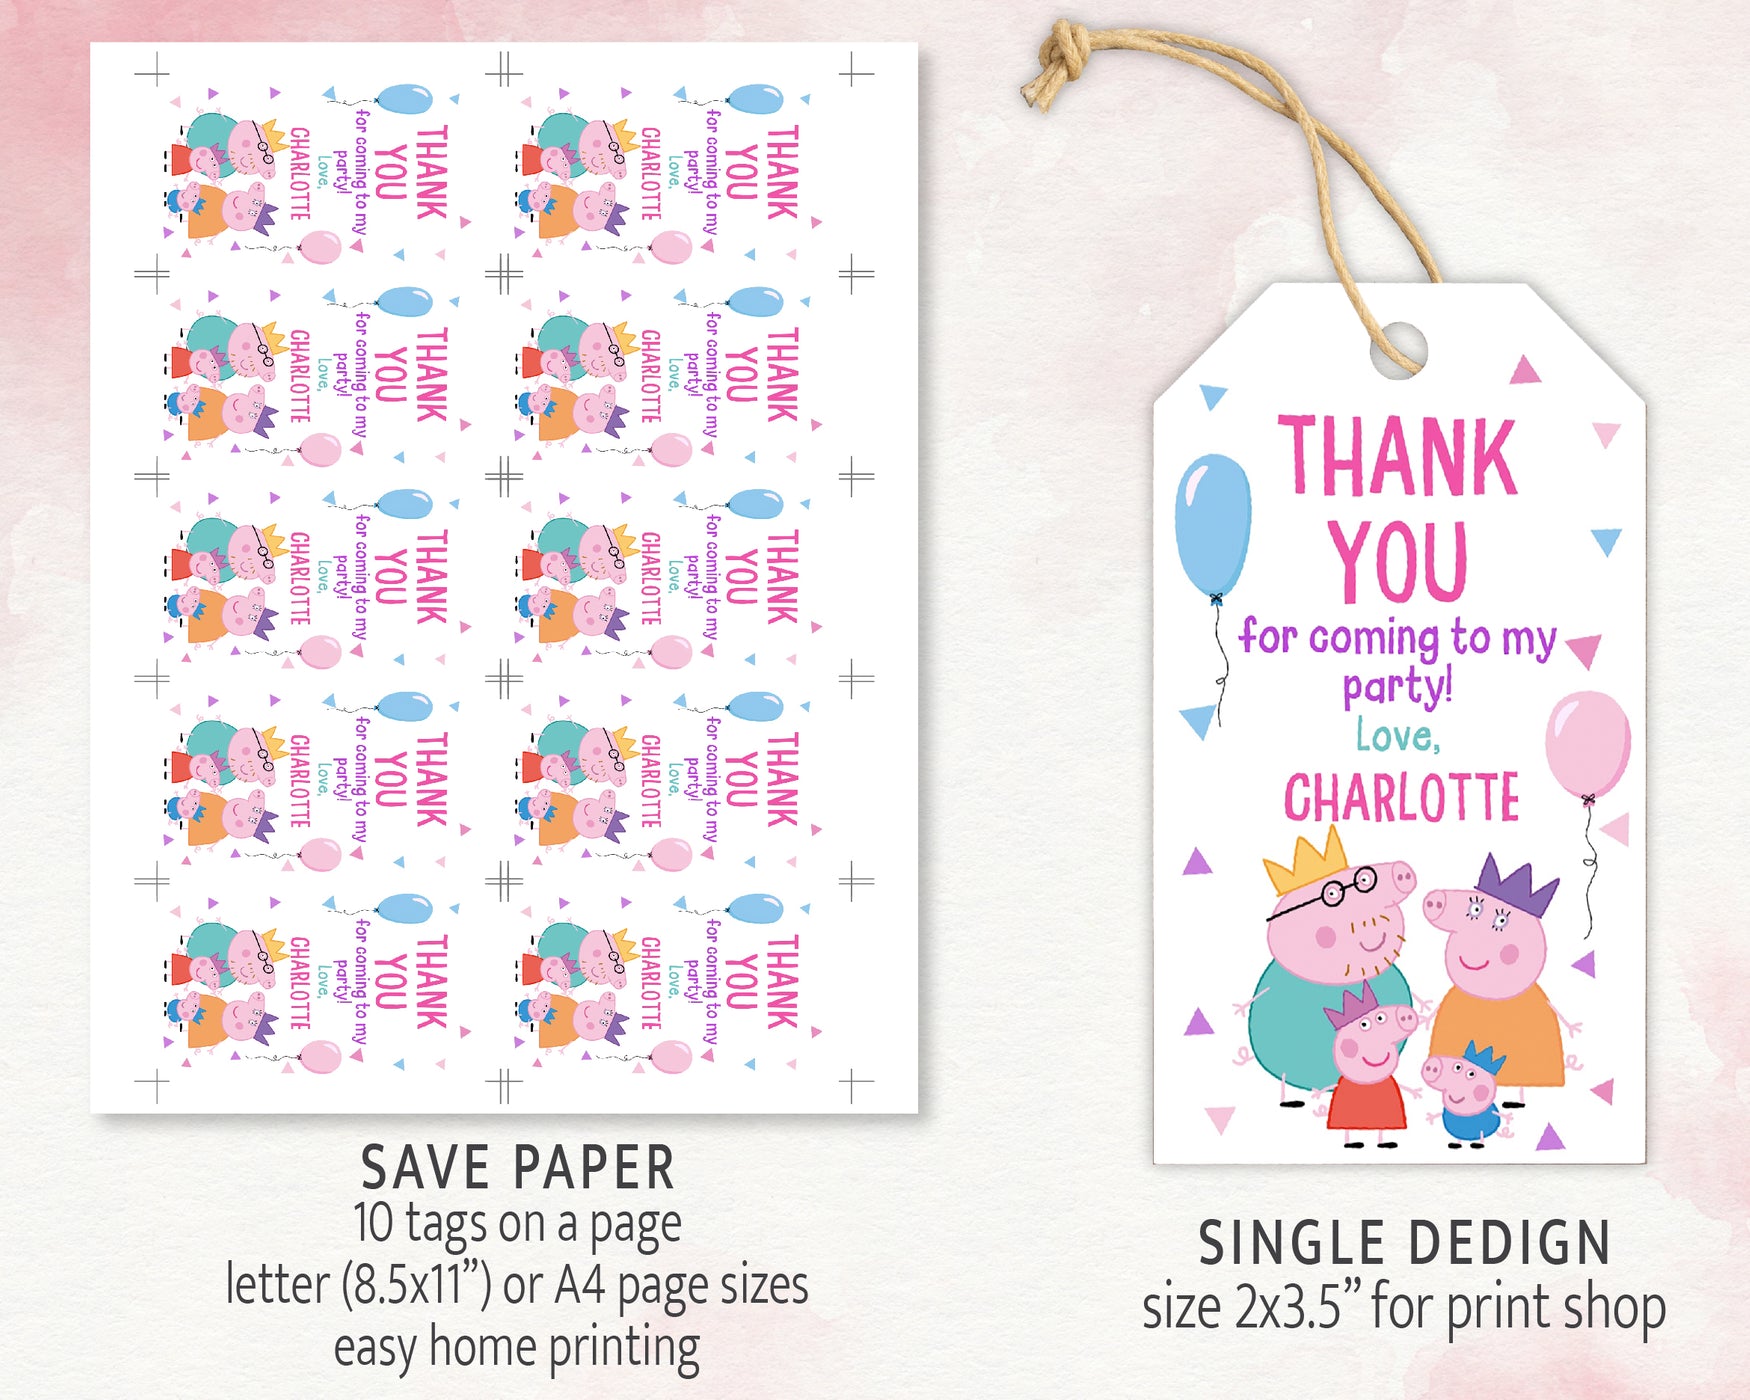 Peppa Pig Thank you tag Template | Editable | Printable | Instant Download